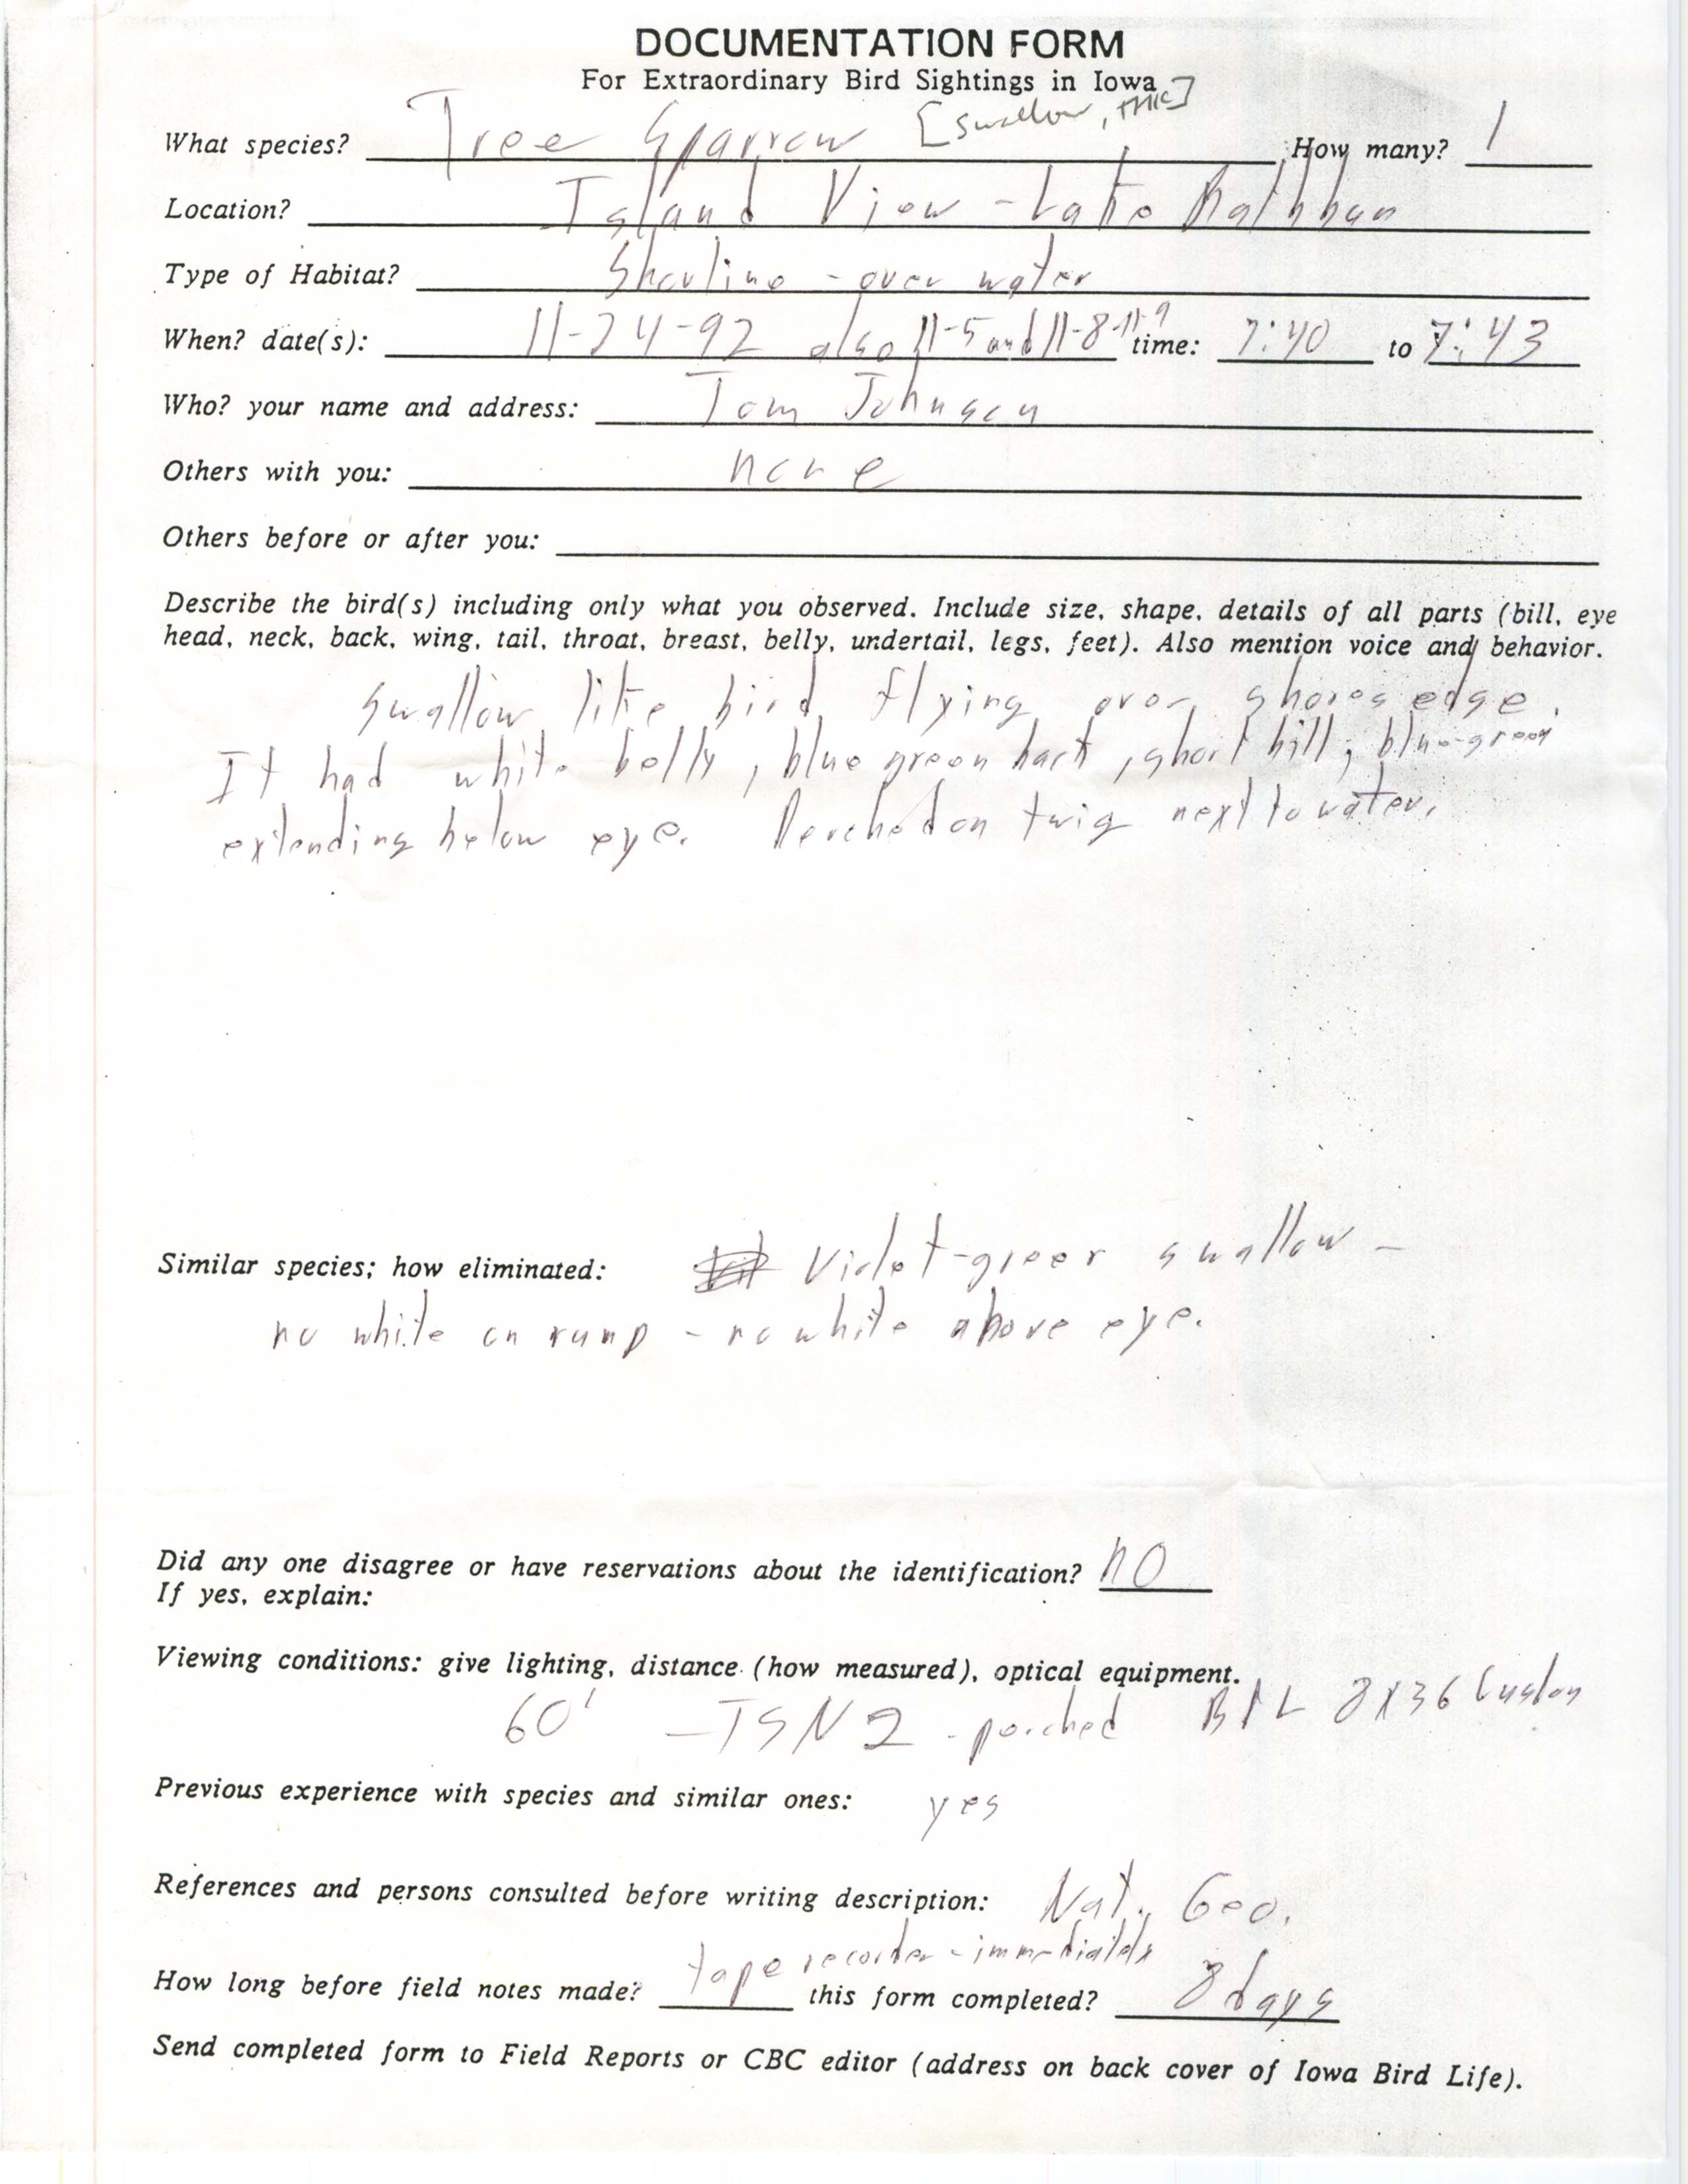 Rare bird documentation form for Tree Swallow at Island View Park in Lake Rathbun in 1992